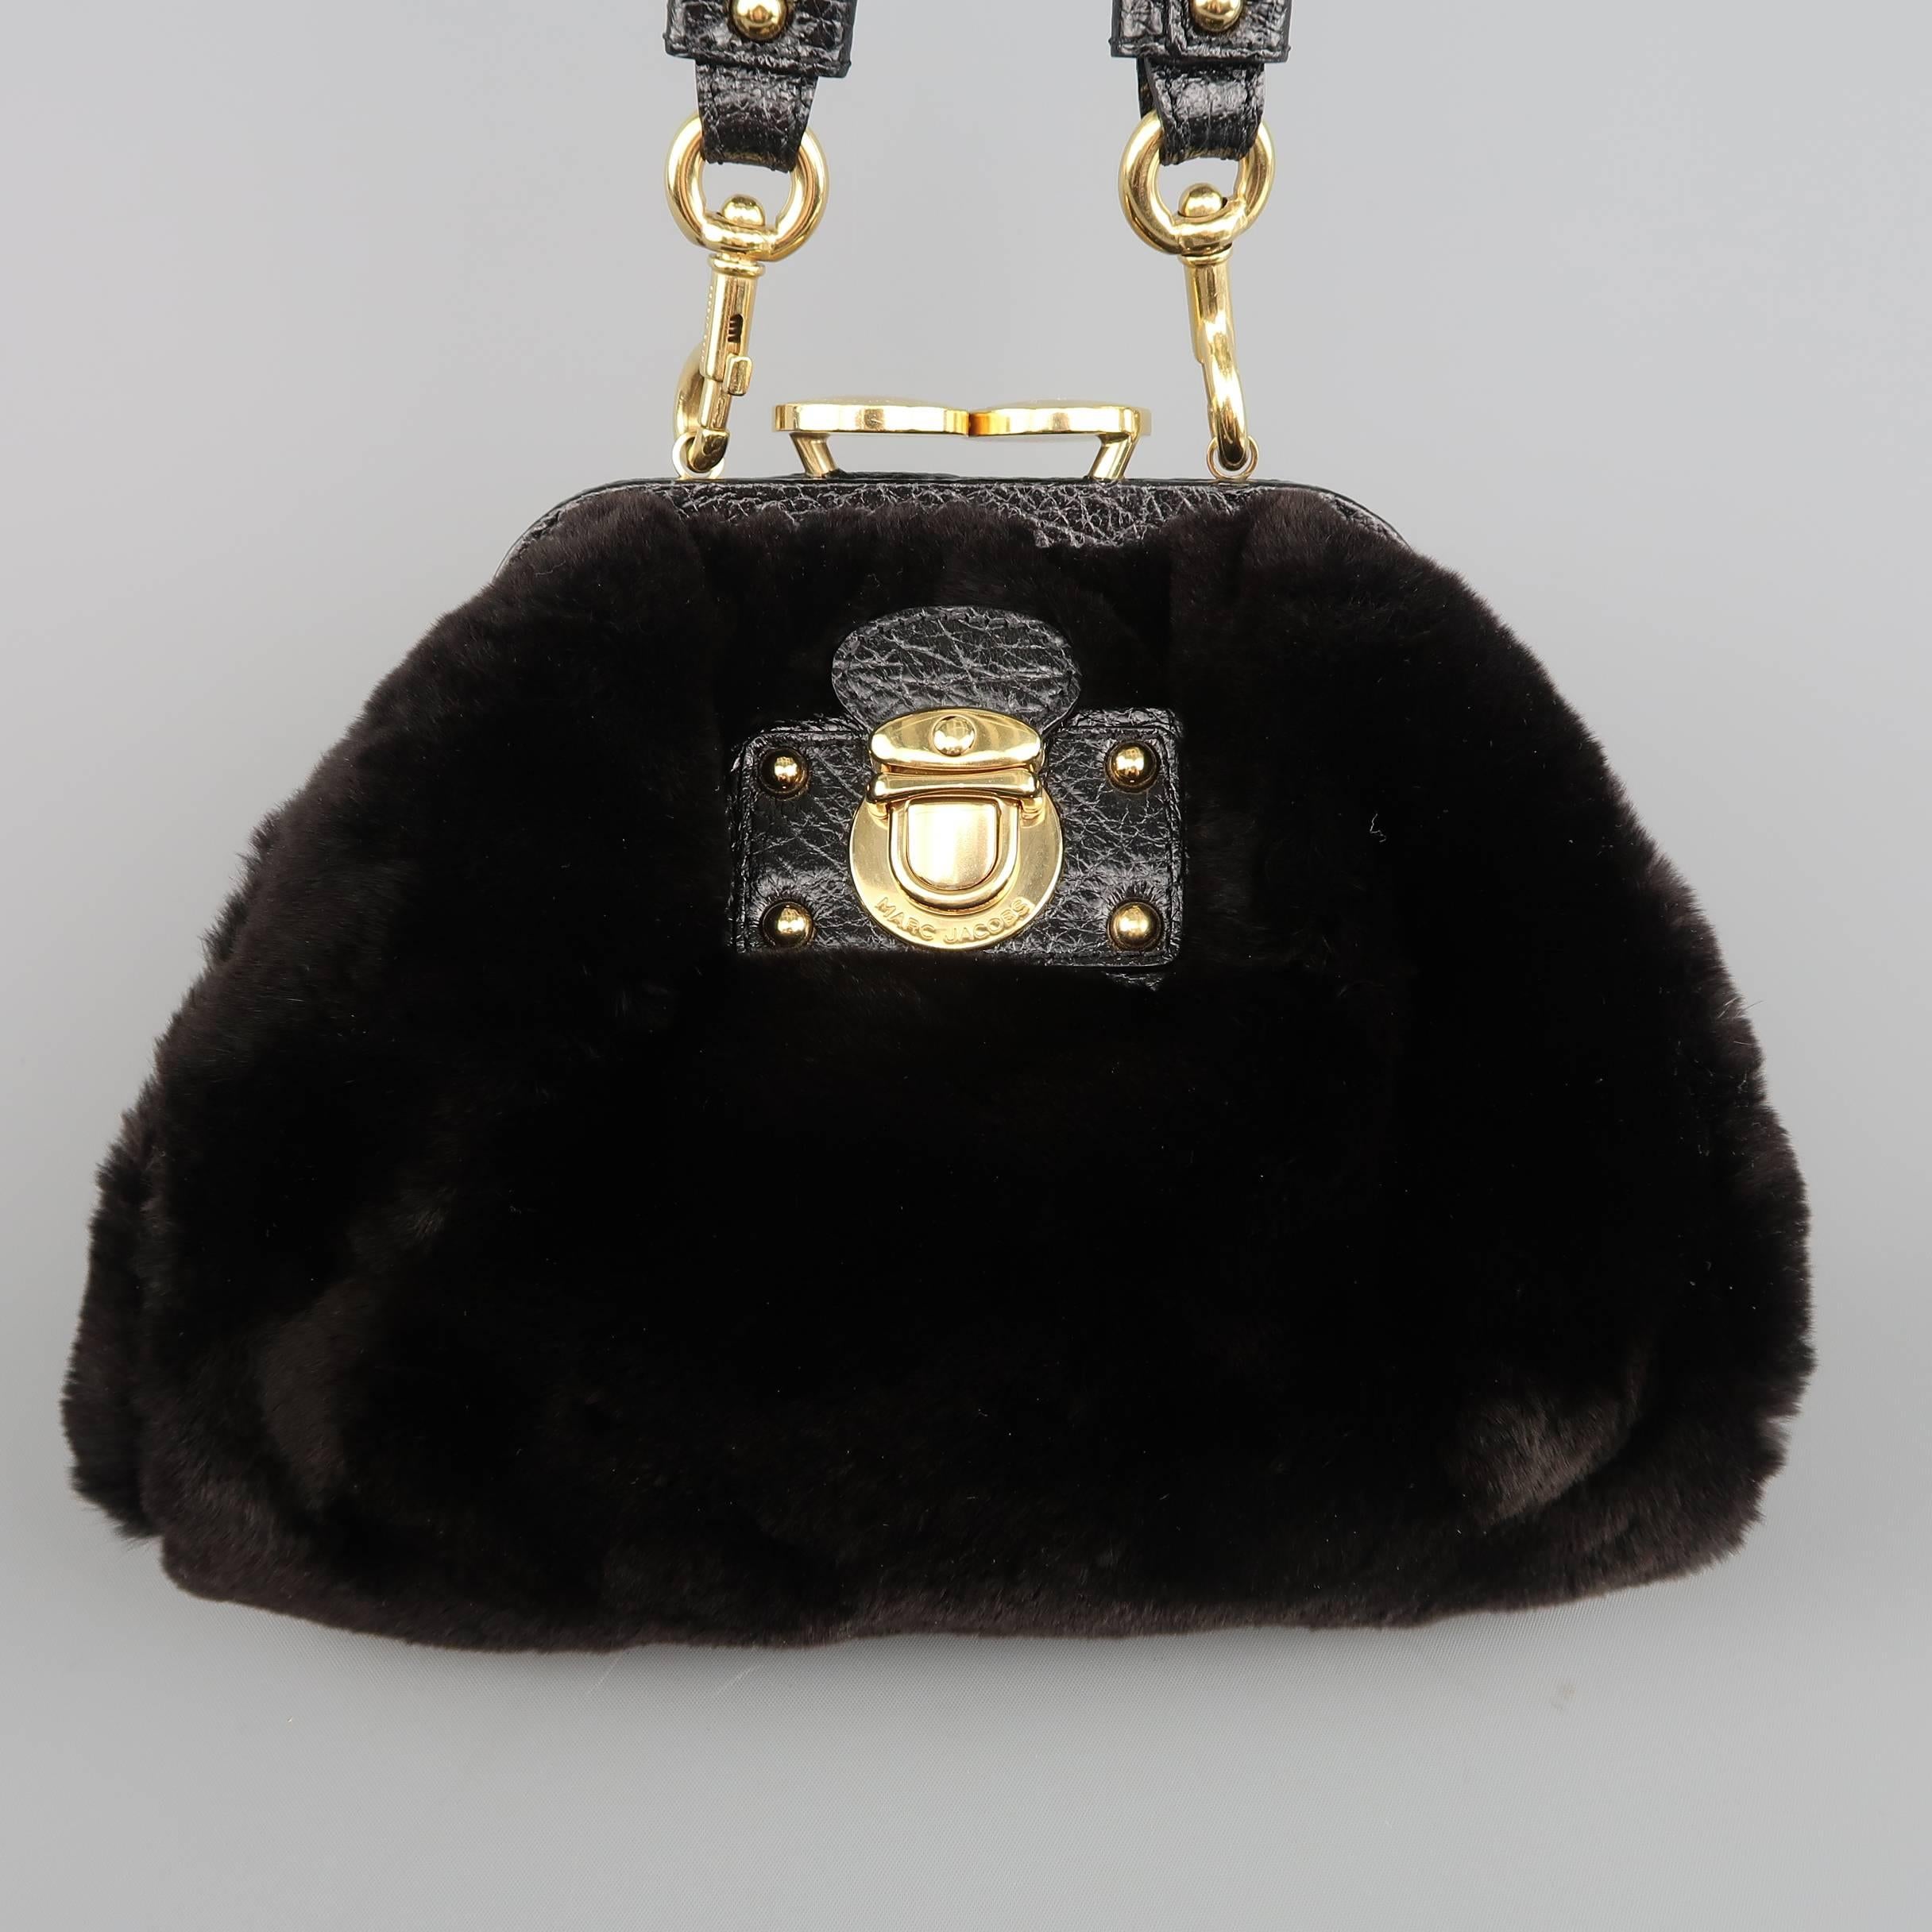 This rare MARC JACOBS Fall Winter 2006 Collection runway handbag features a black mink fur purse with oversized gold tone kiss lock closure with optional chain shoulder strap, and emerald green leather liner. Made in Italy.
 
Excellent Pre-Owned